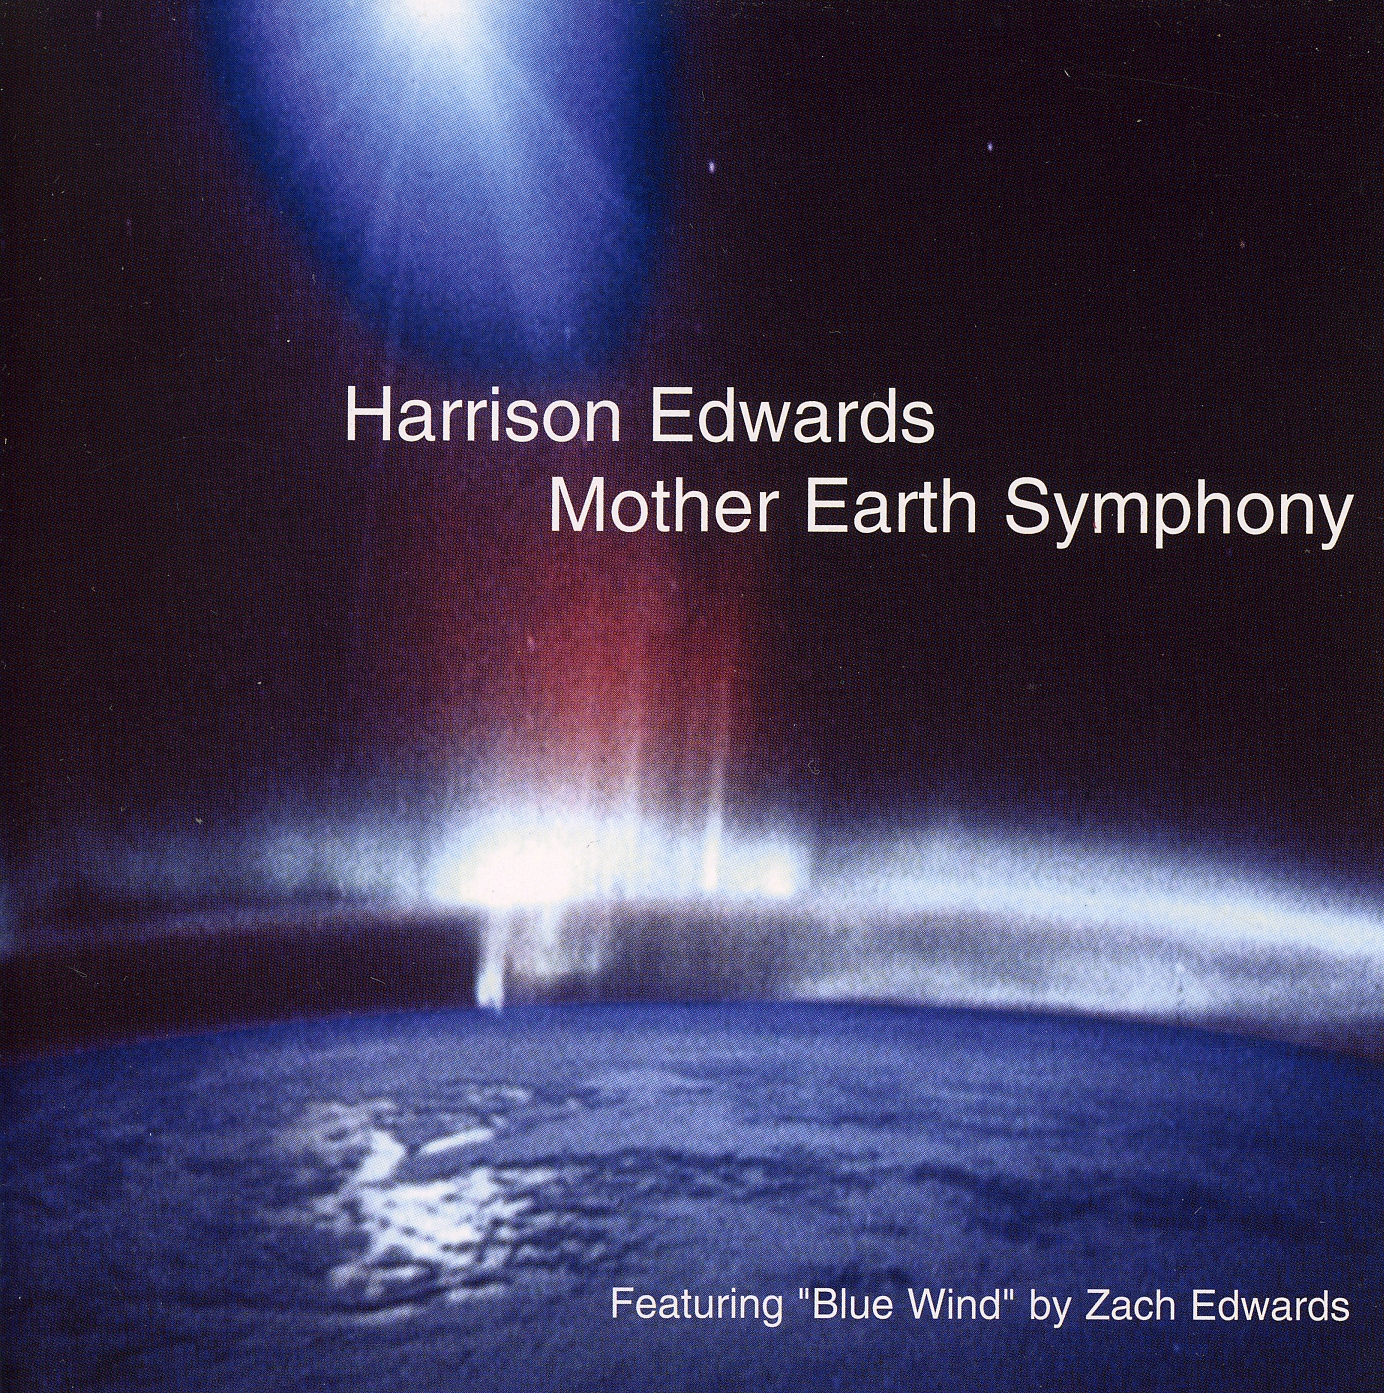 MOTHER EARTH SYMPHONY